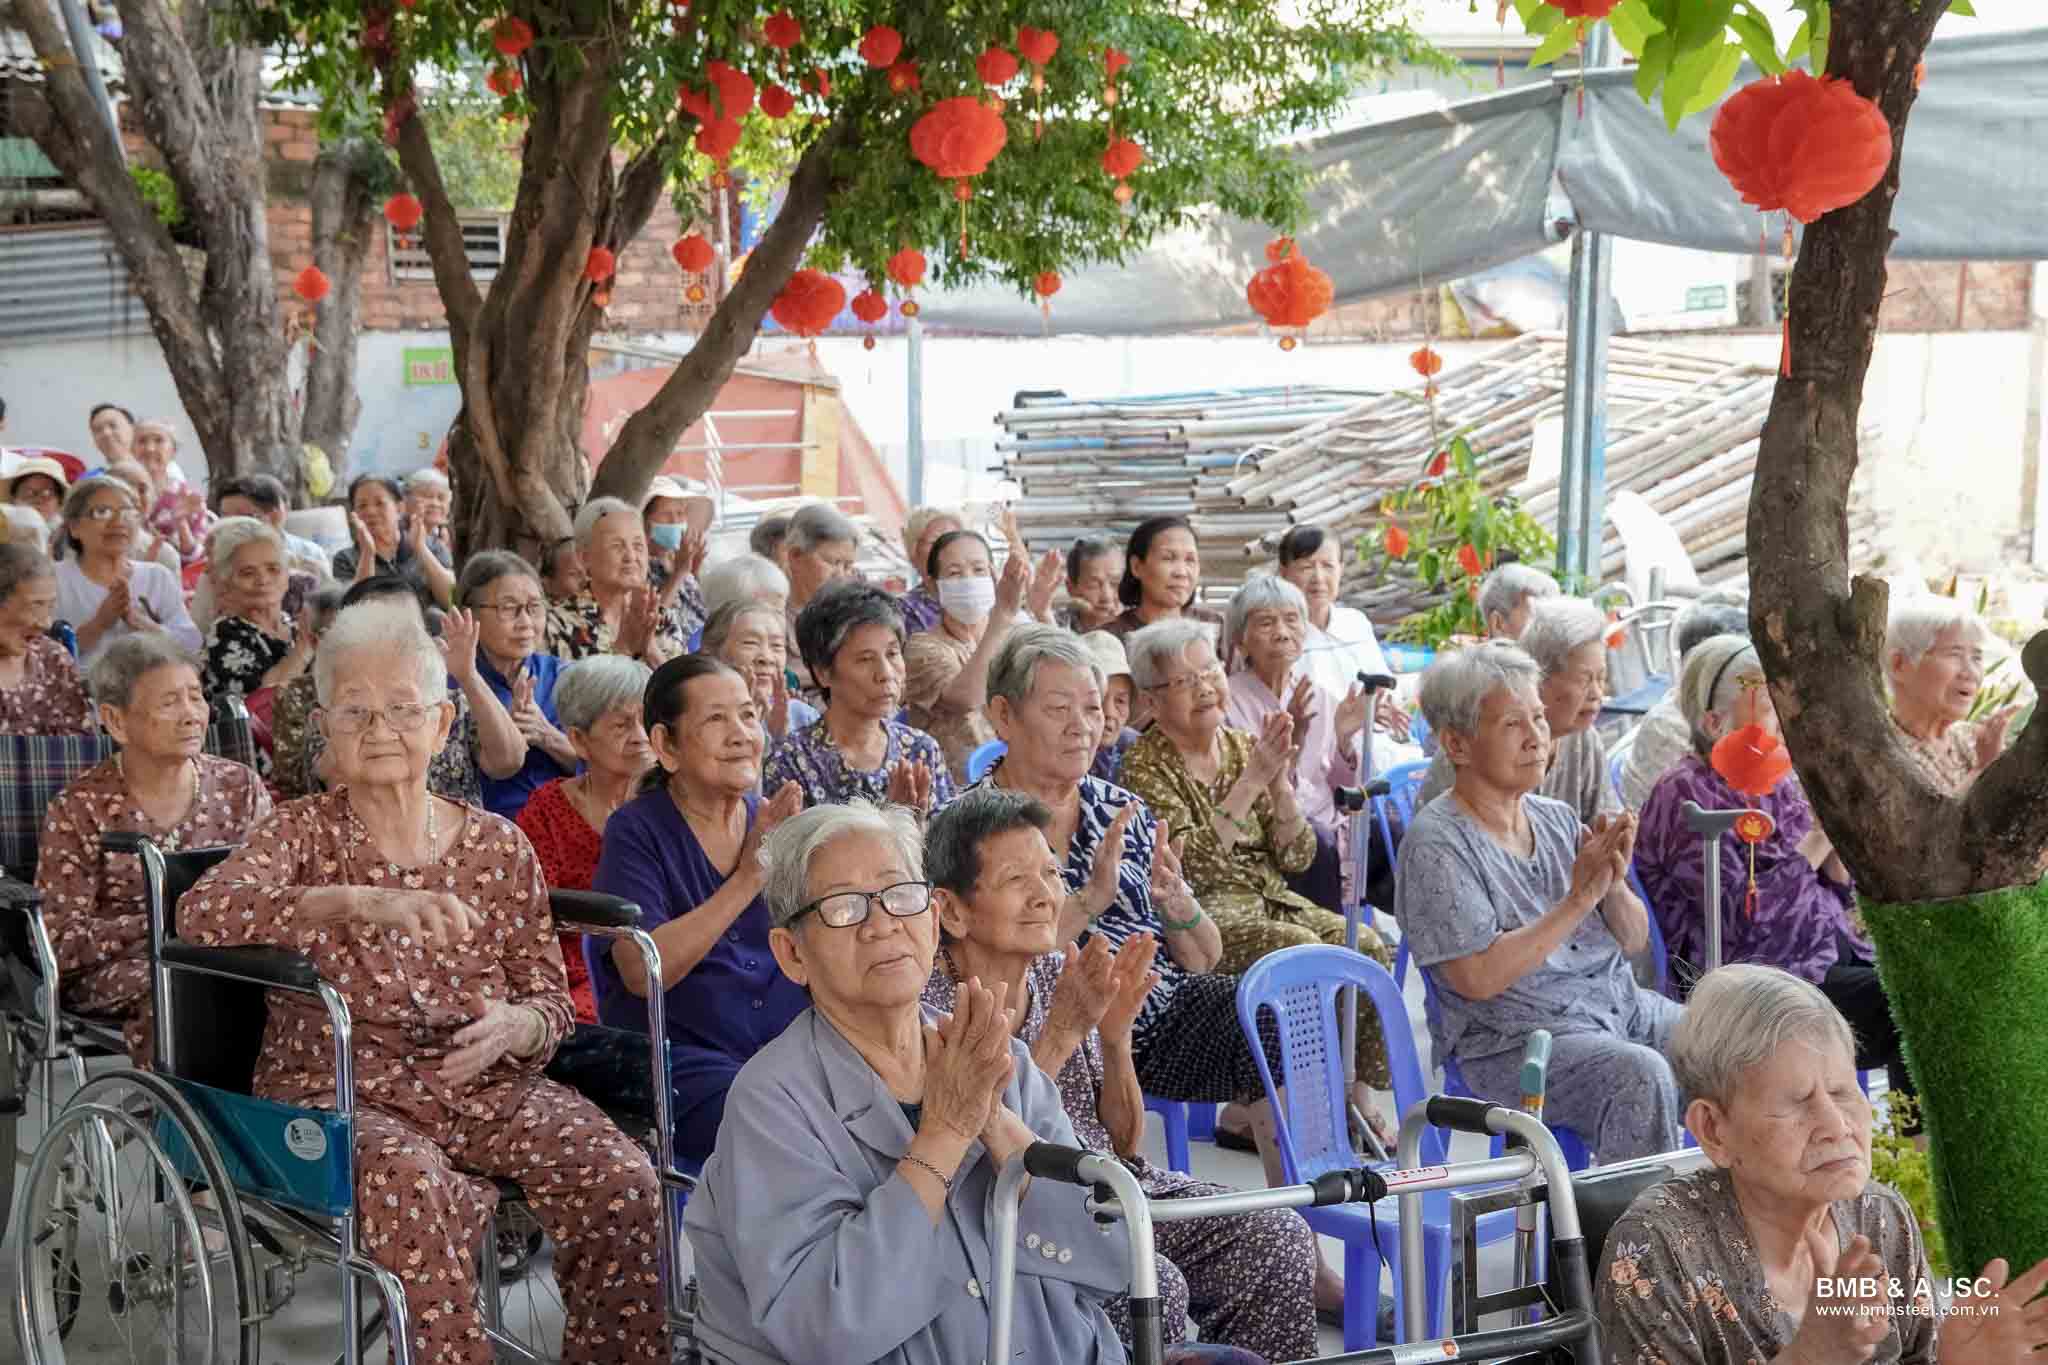 Opening ceremony and donation of the kitchen at Thien An home